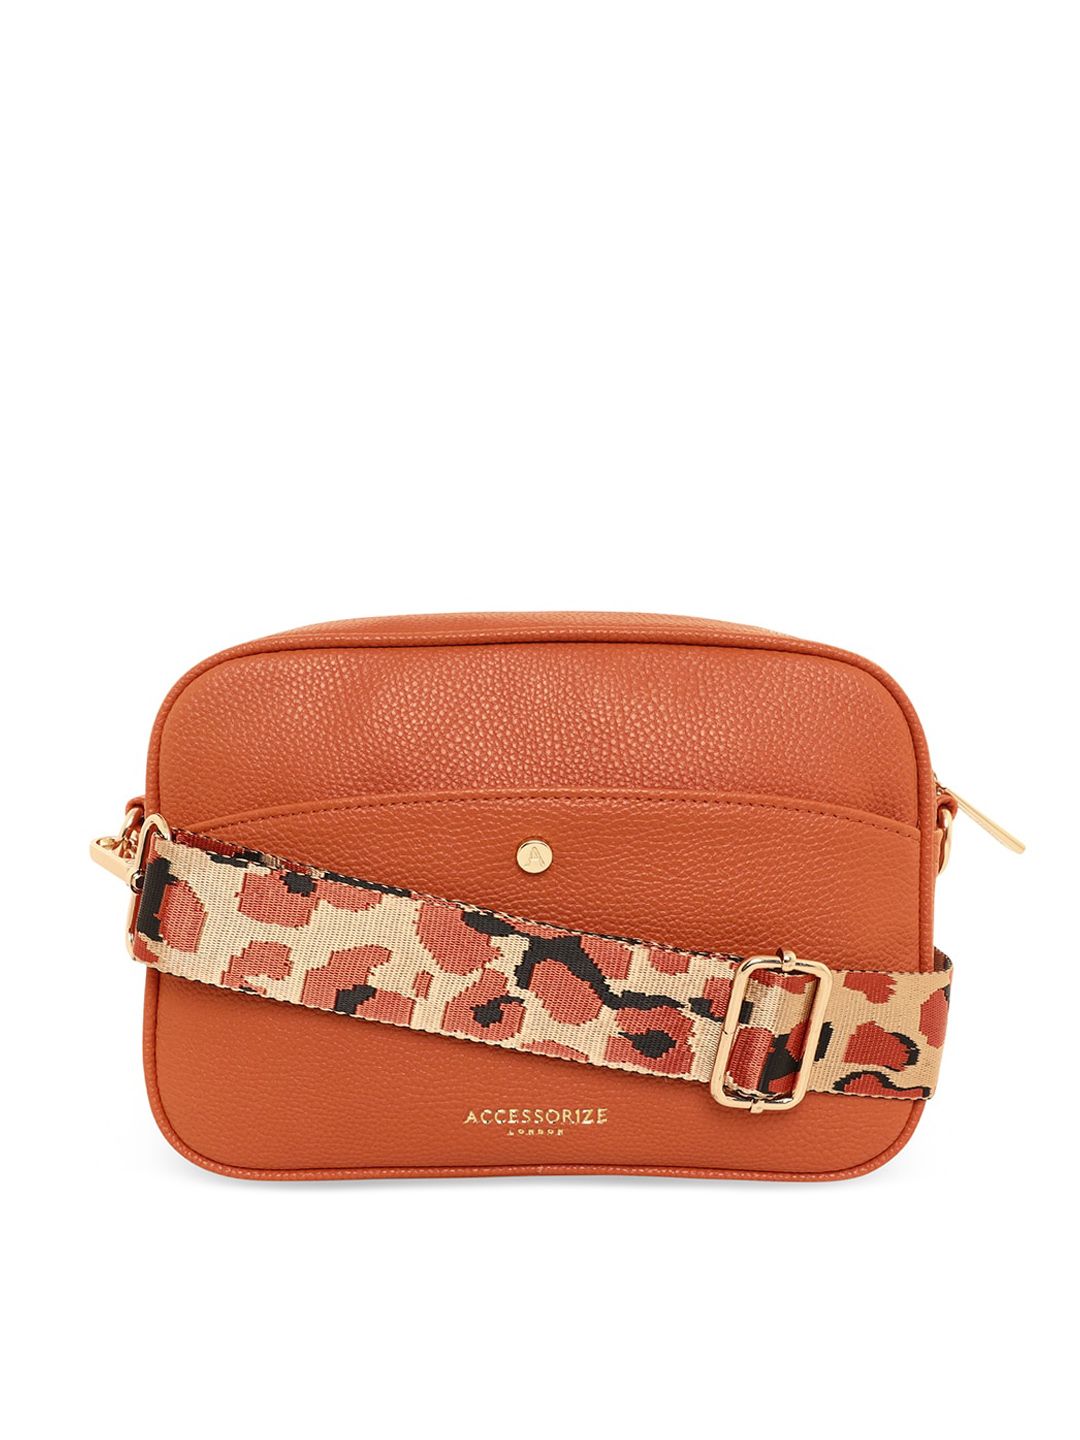 Accessorize Women Orange Structured Sling Bag Price in India